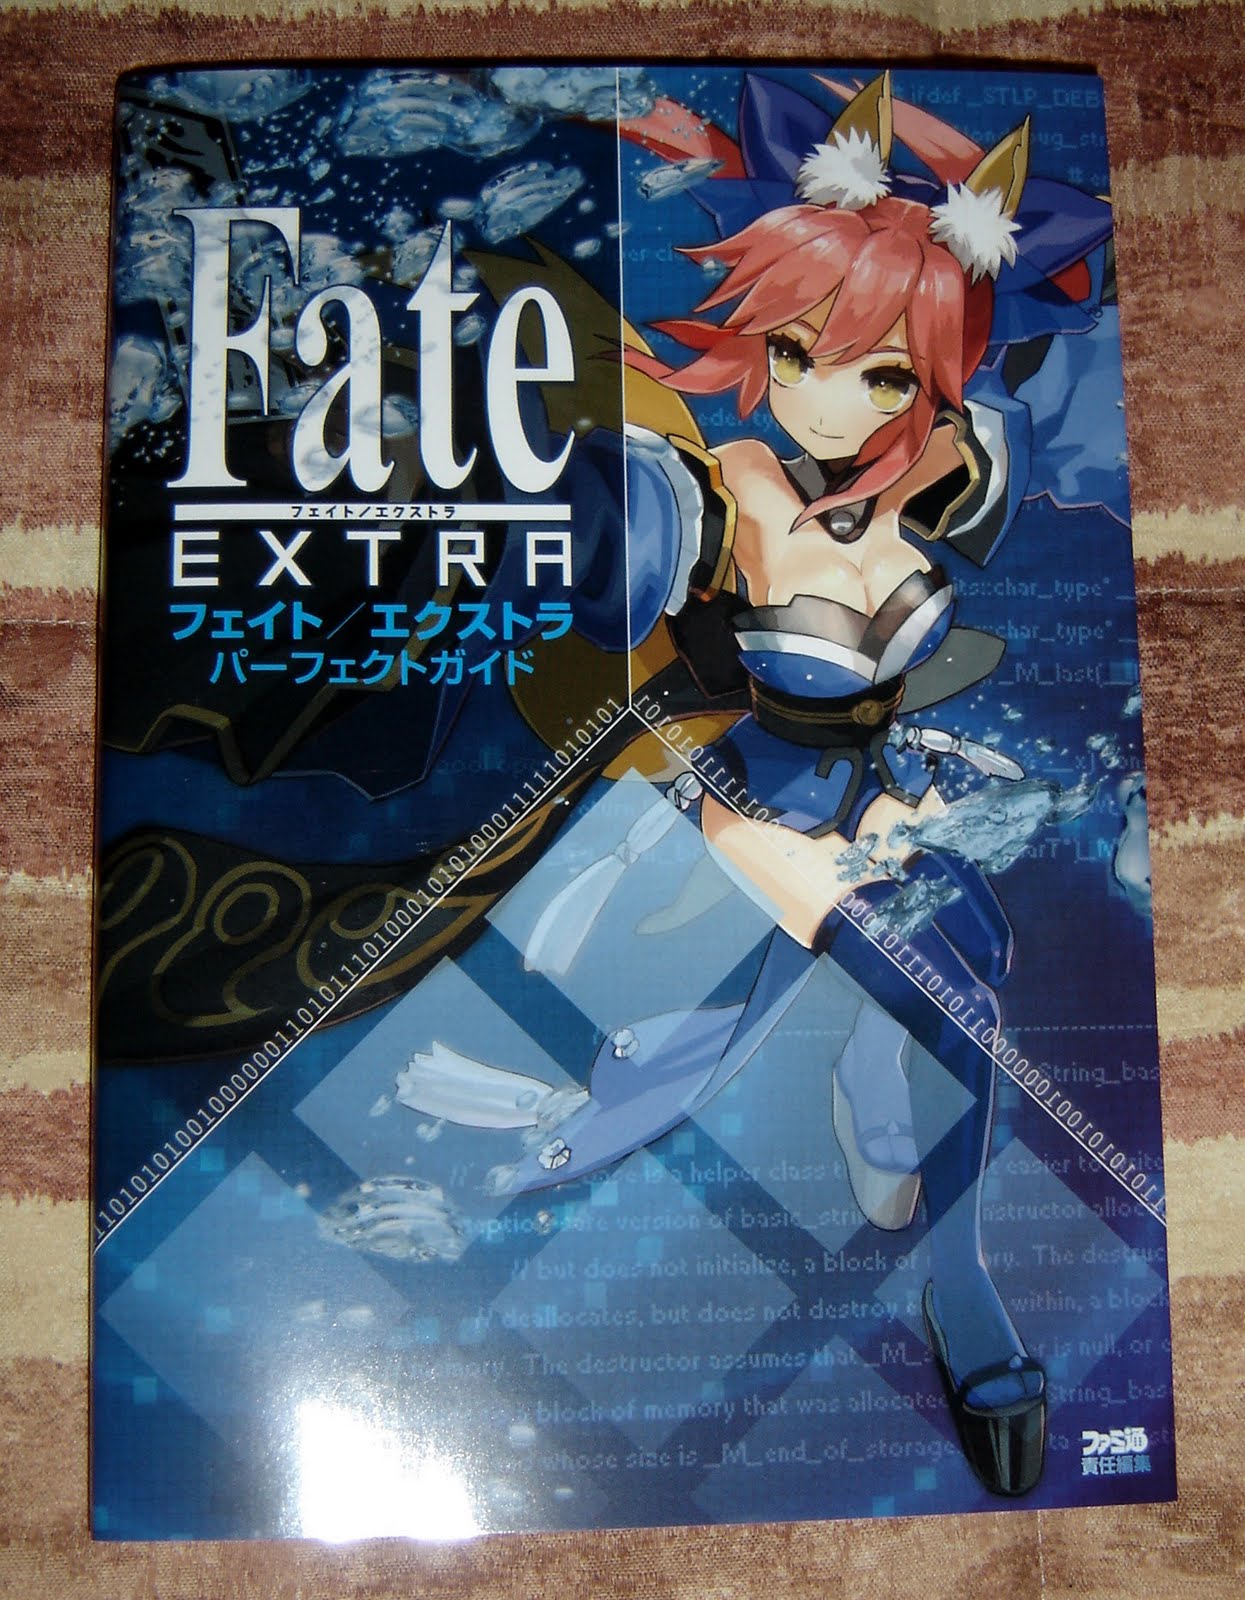 Soth S Blog Fate Extra Perfect Guide